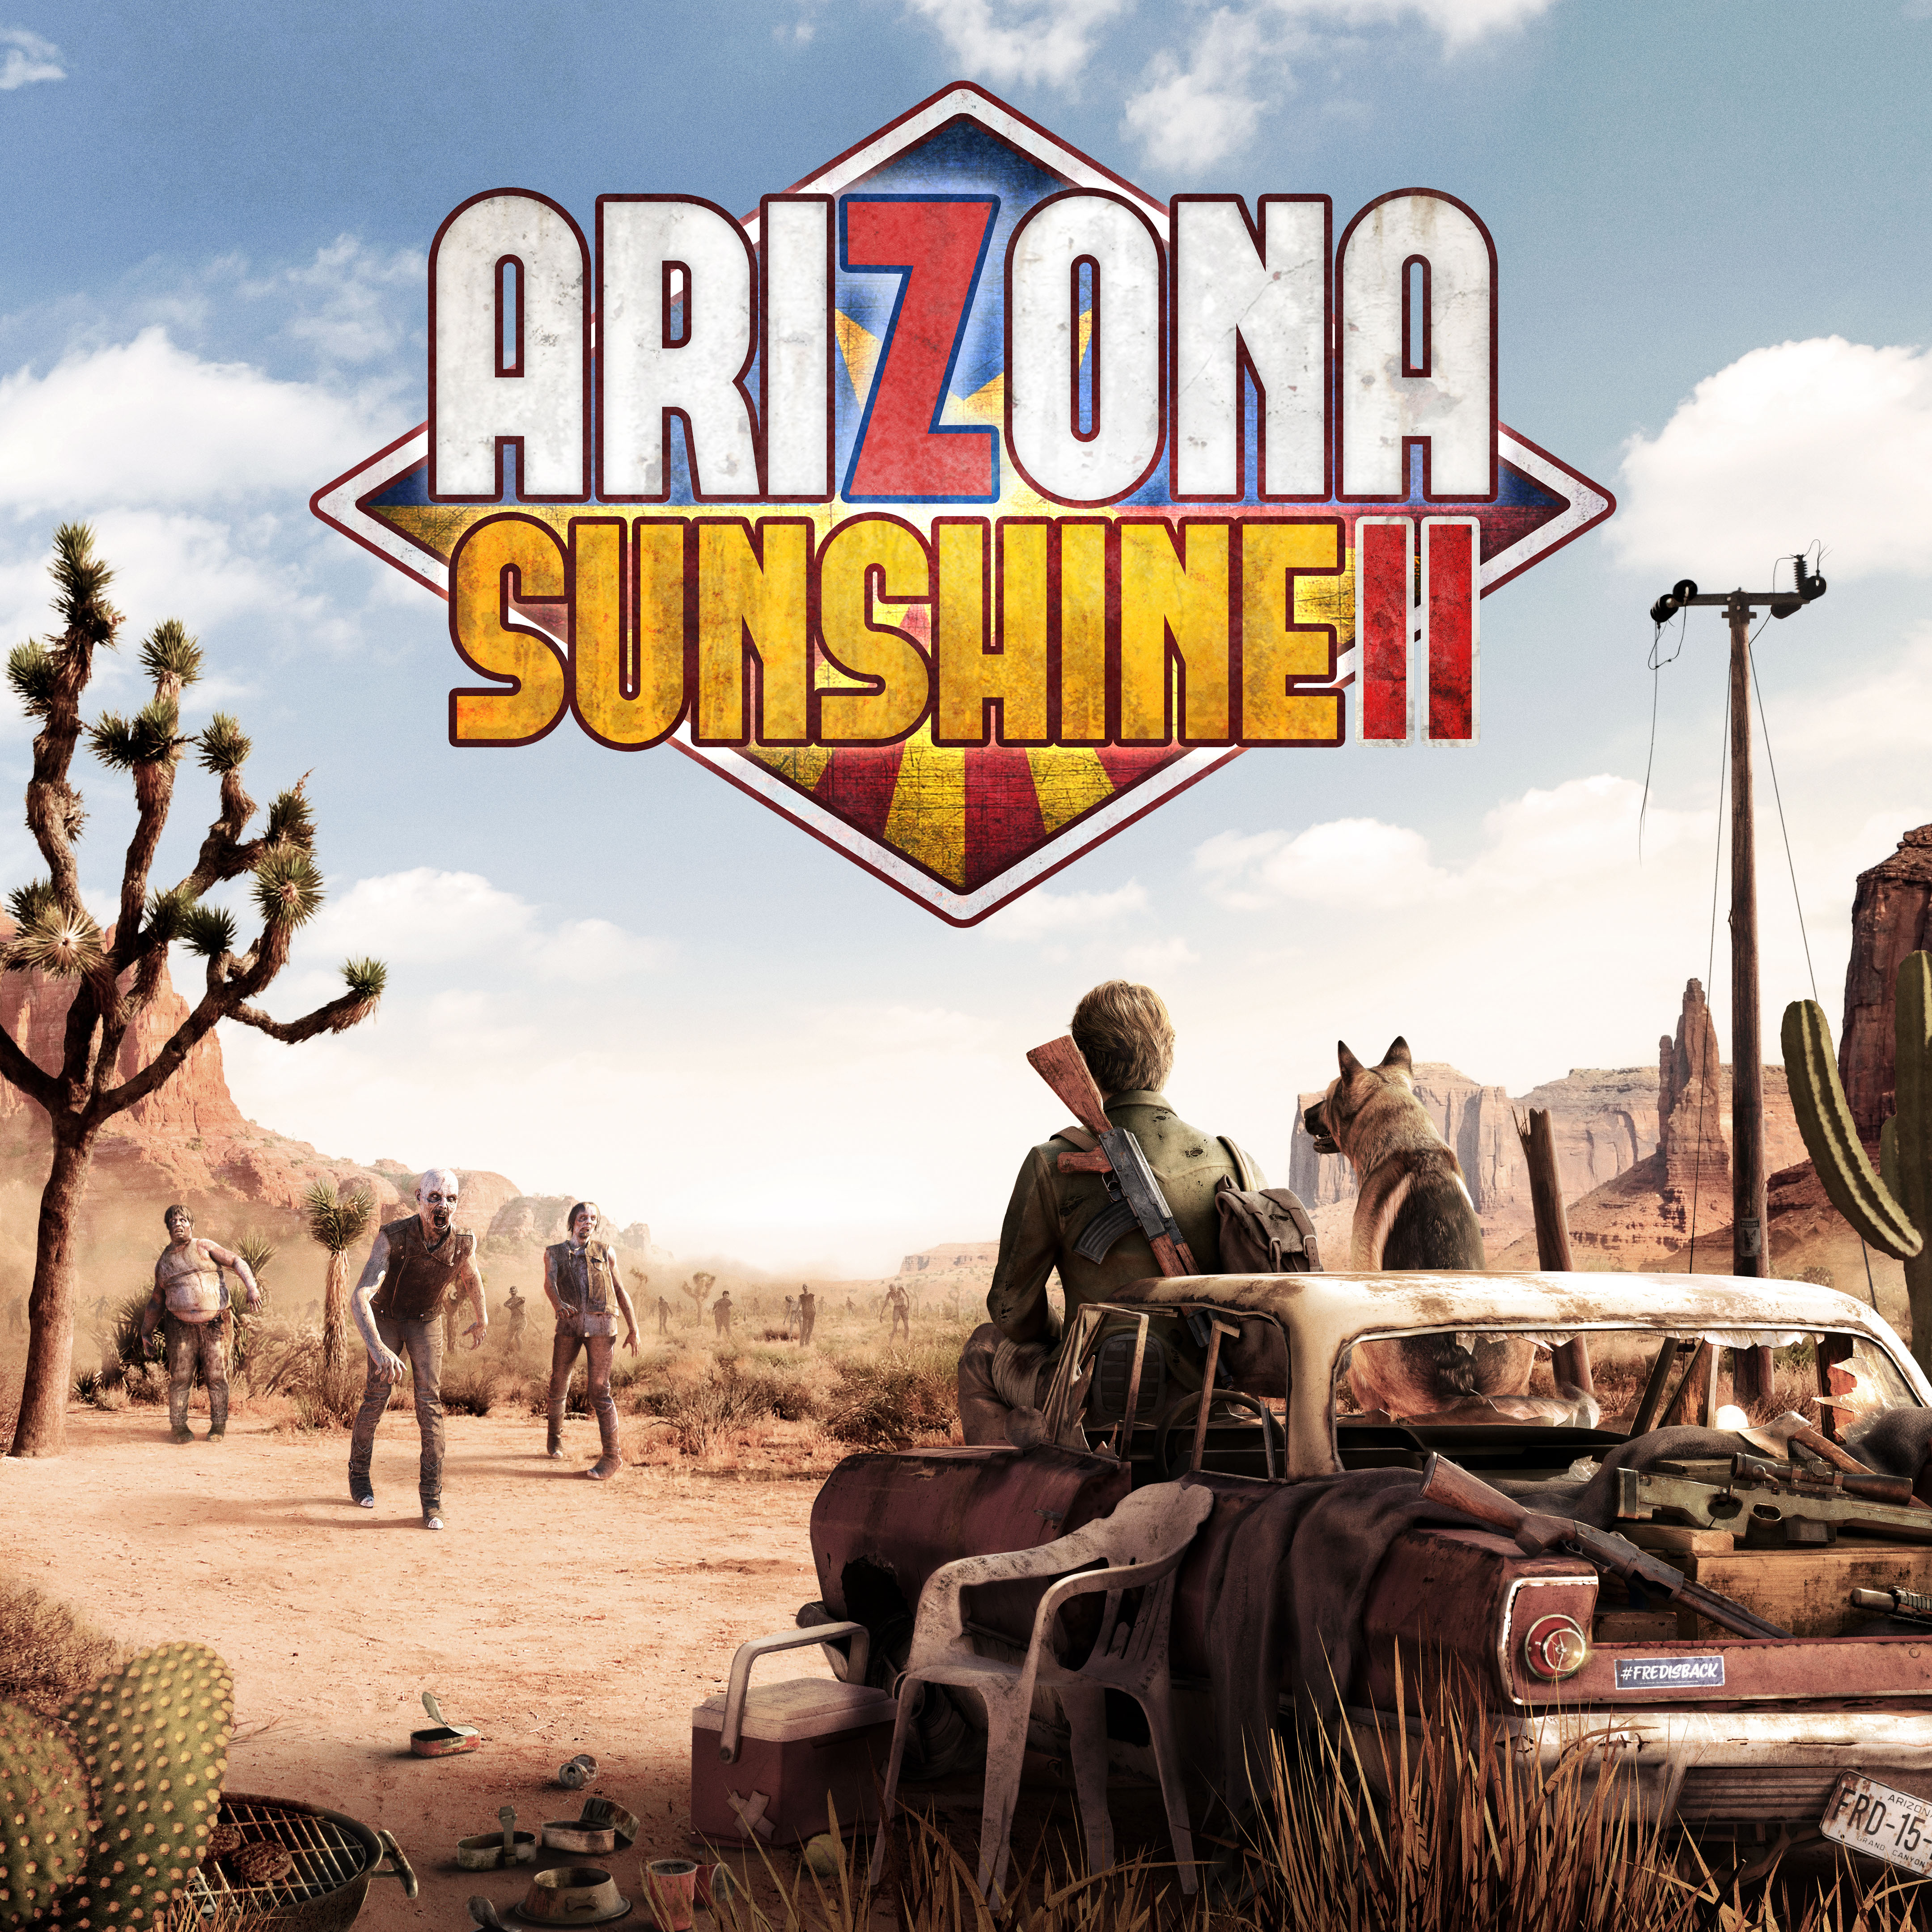 First look at Arizona Sunshine 2 revealed, launches on PS VR2 this year –  PlayStation.Blog